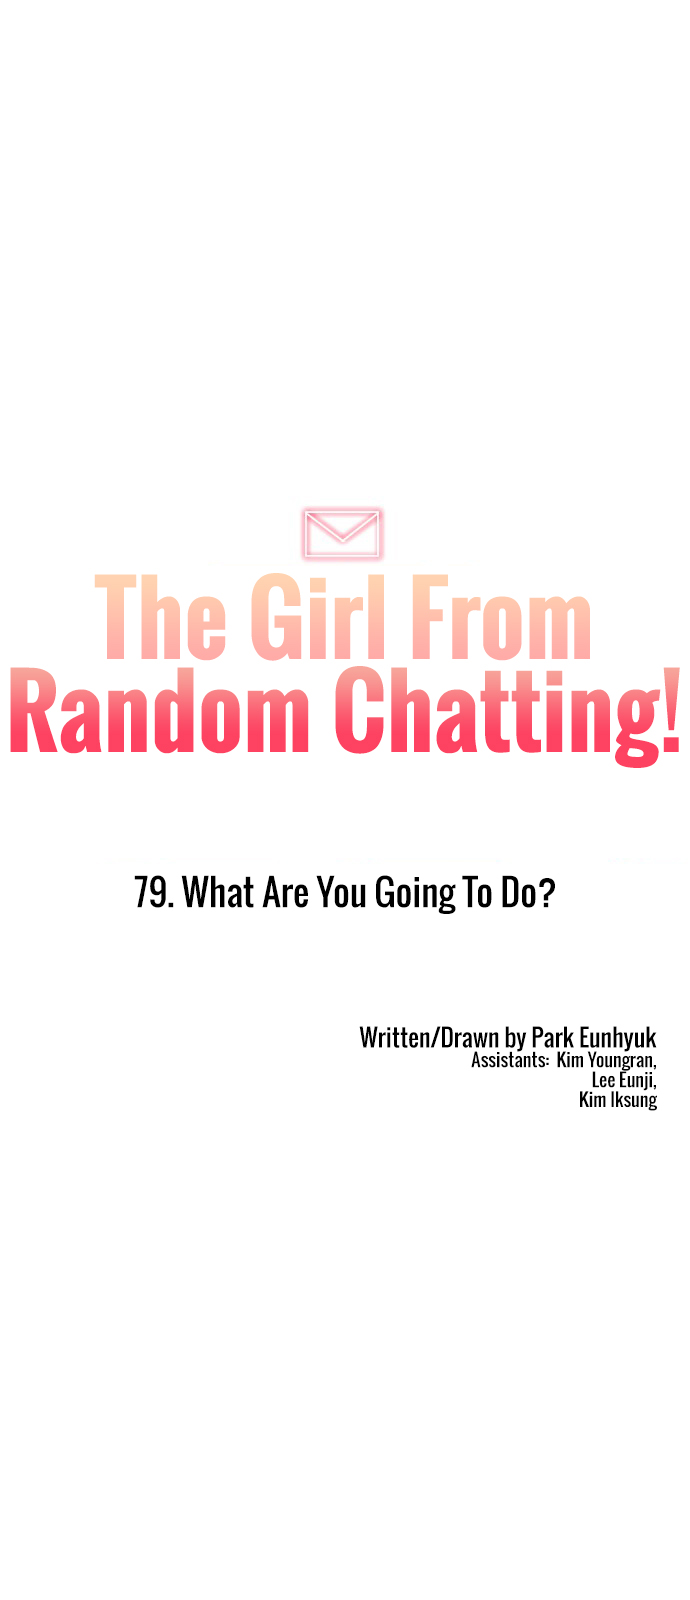 The Girl from Random Chatting! Ch. 79 What Are You Going To Do?